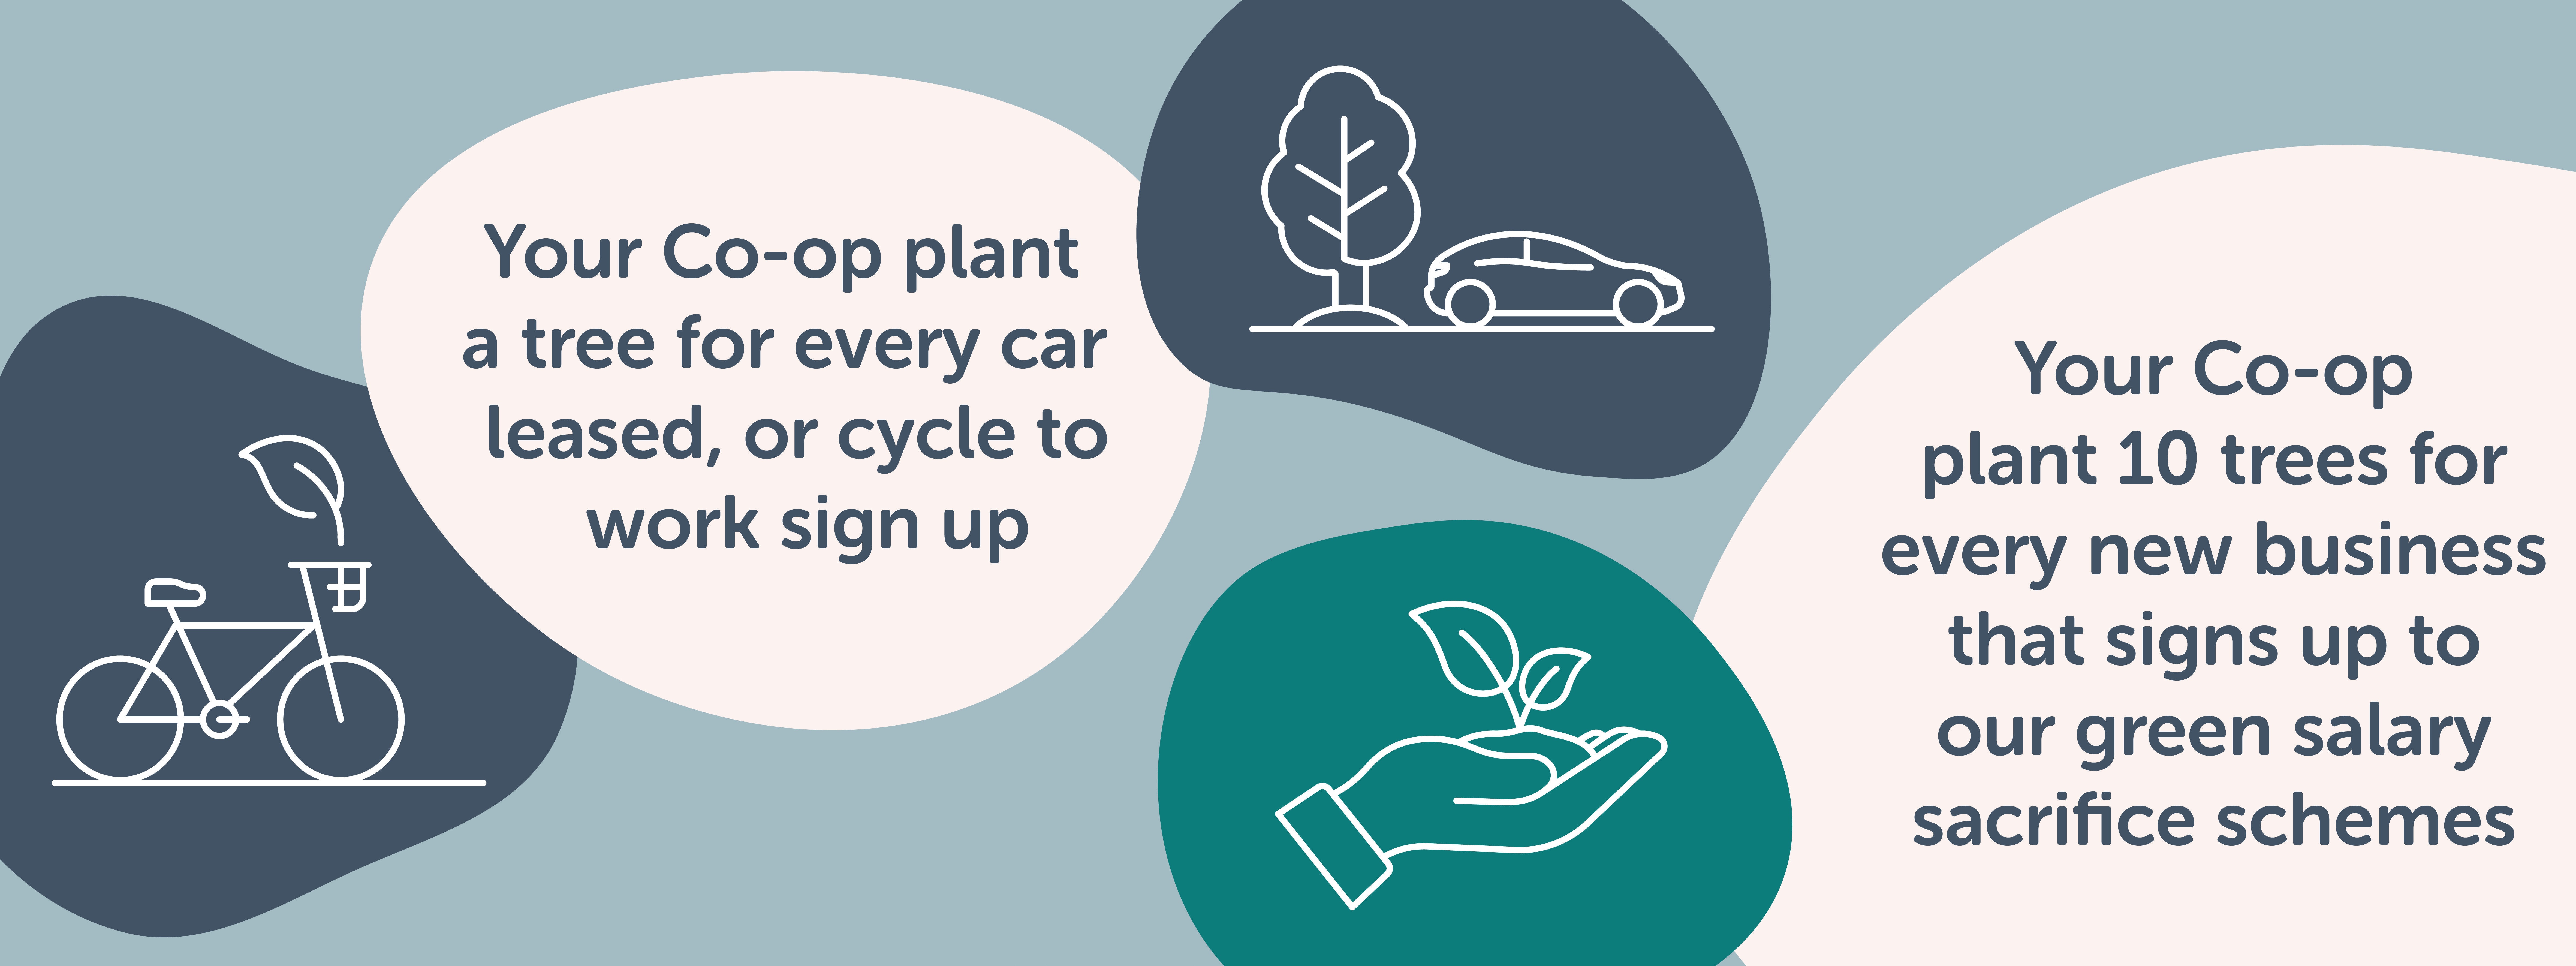 your co-op plant a tree for every sign up 